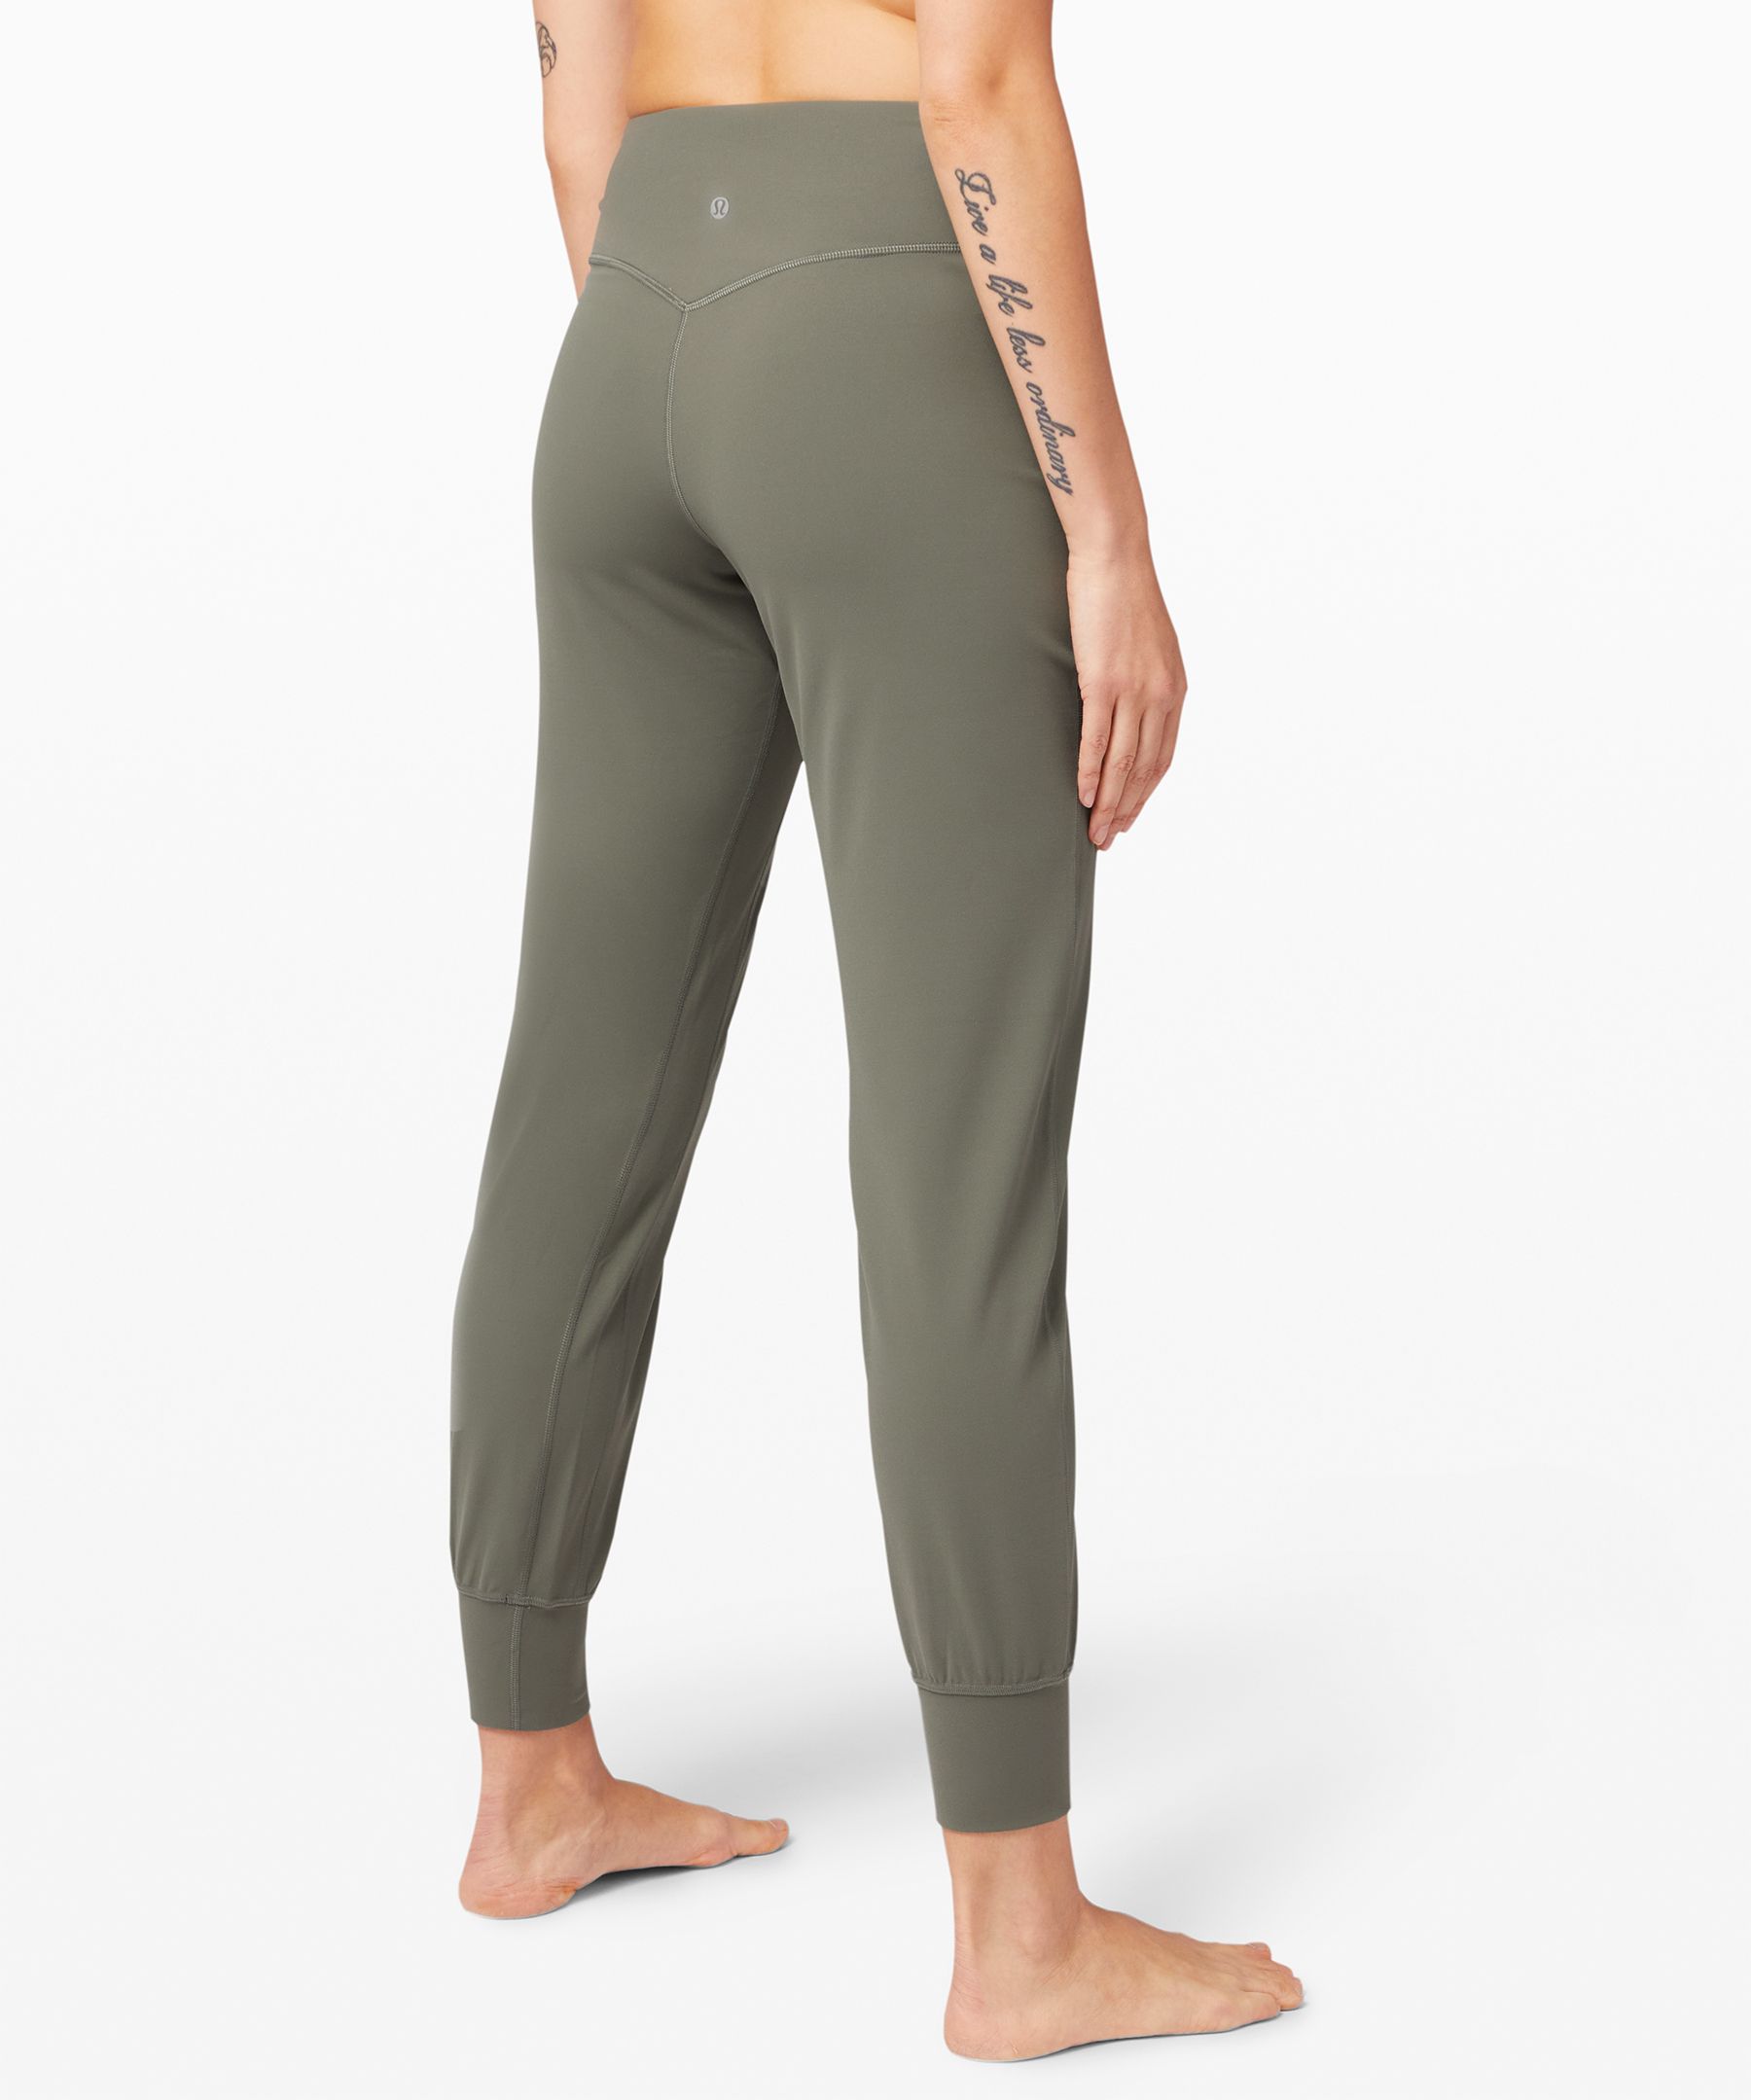 Lululemon Align joggers review: Should you buy them? - Reviewed